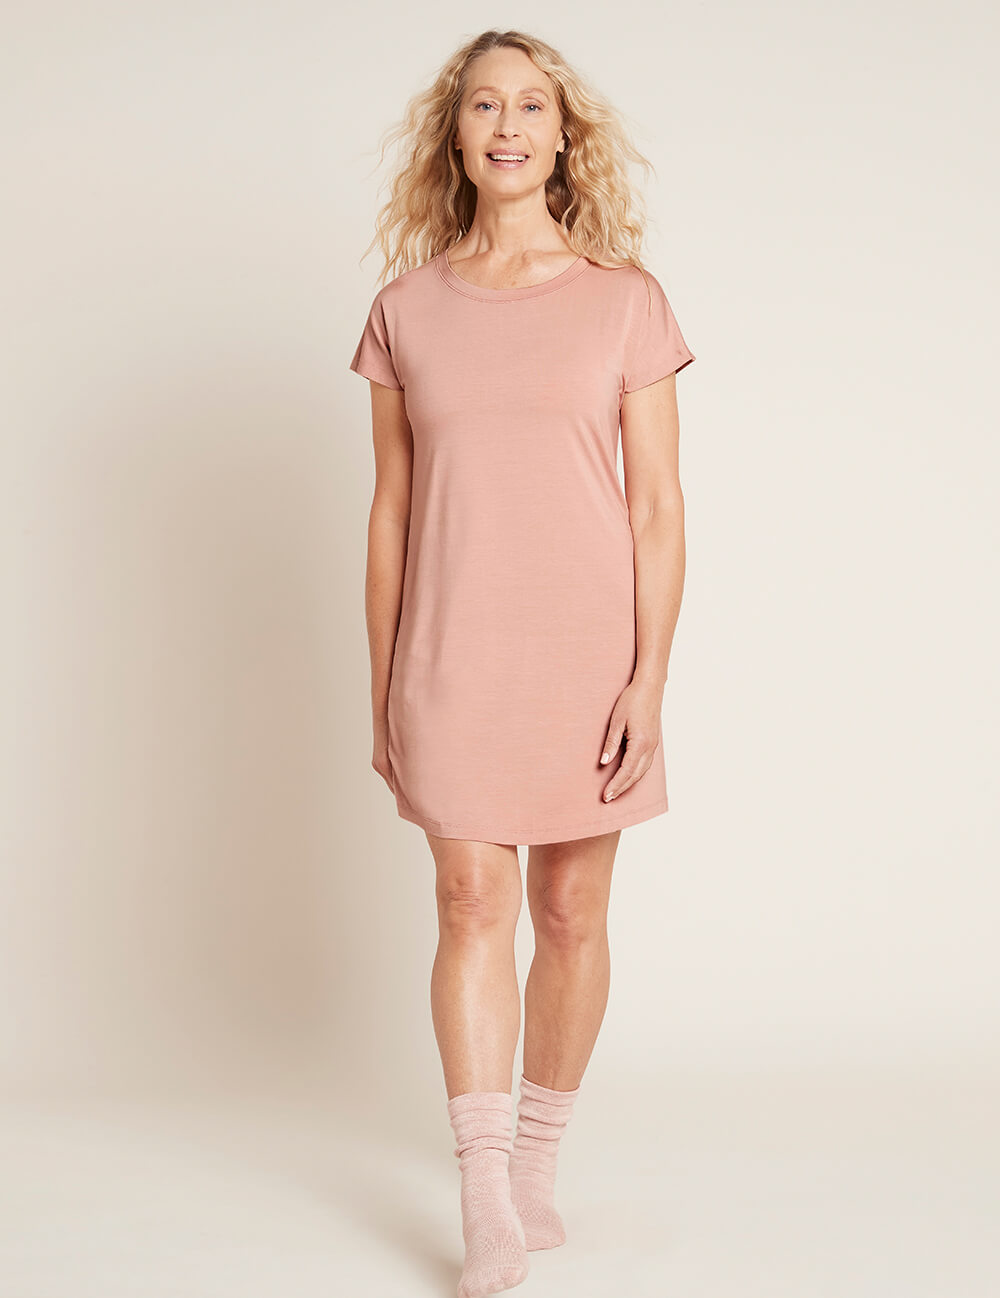 Boody Women's Goodnight Night Dress in Dusty Pink Front